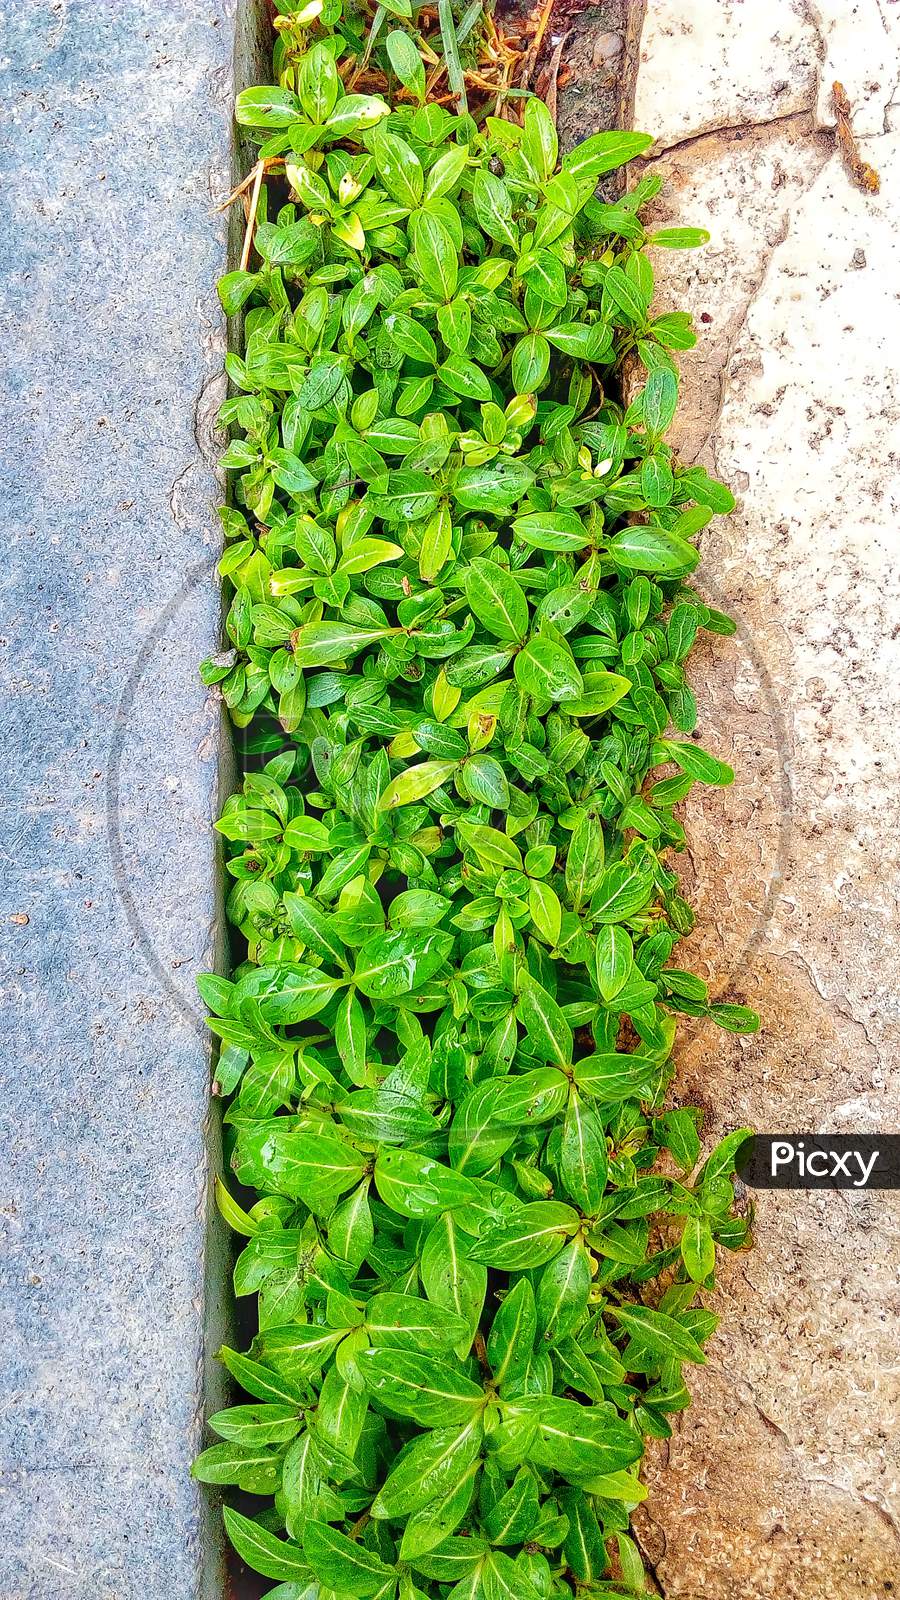 Greenery in small places